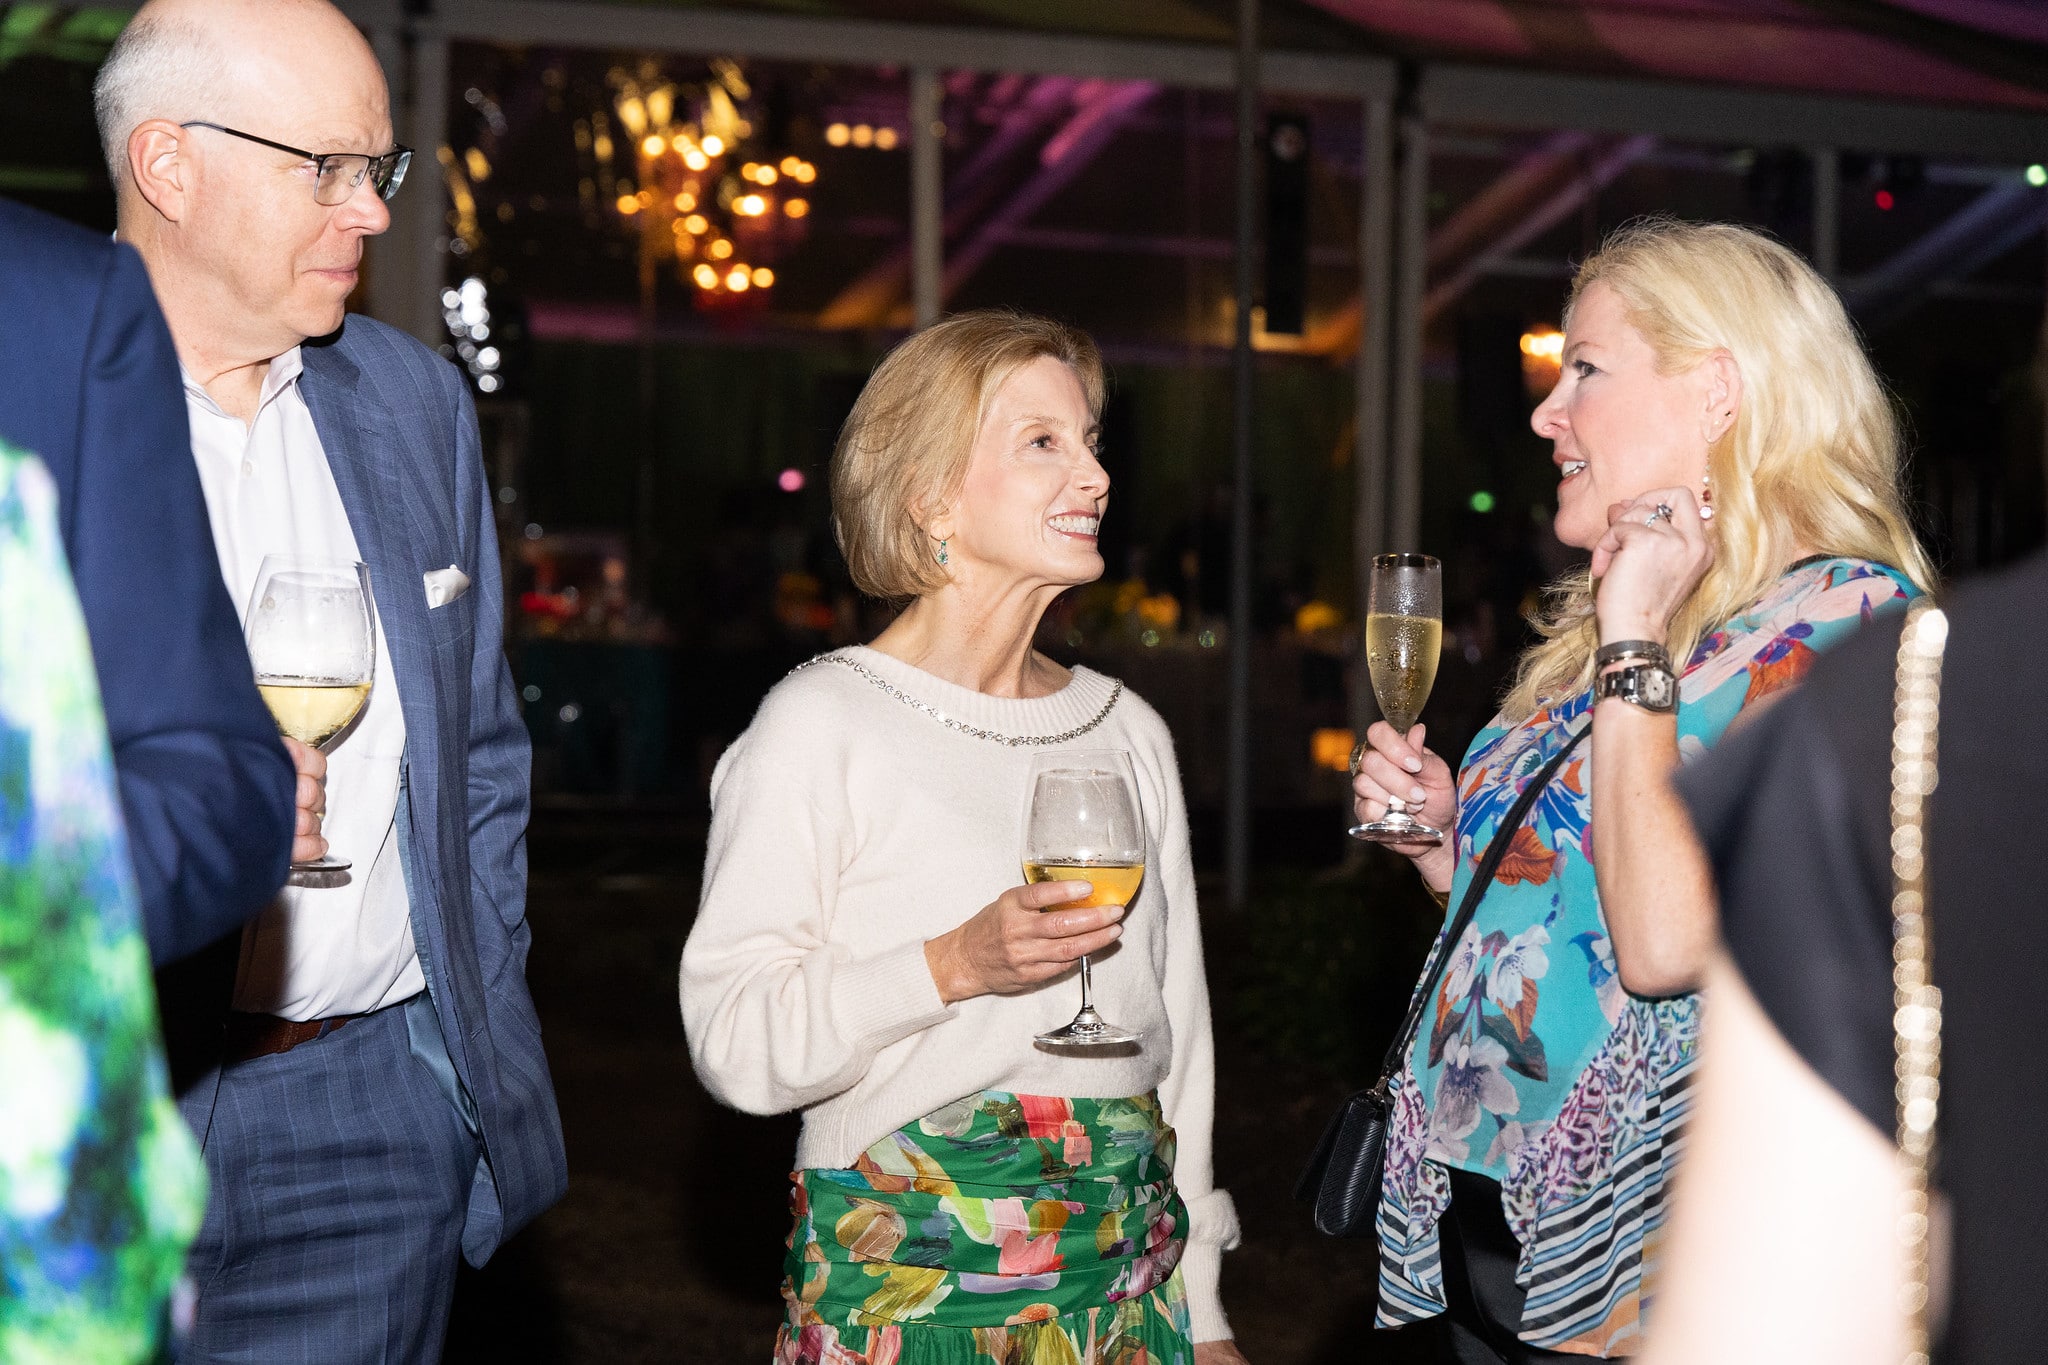 From L-R: Jeff Whittle, Polly Whittle, Kara Kinder Vidal Gala on the Green® at Discovery Green in downtown Houston. February 23, 2023. Photo: Lawrence Elizabeth Knox